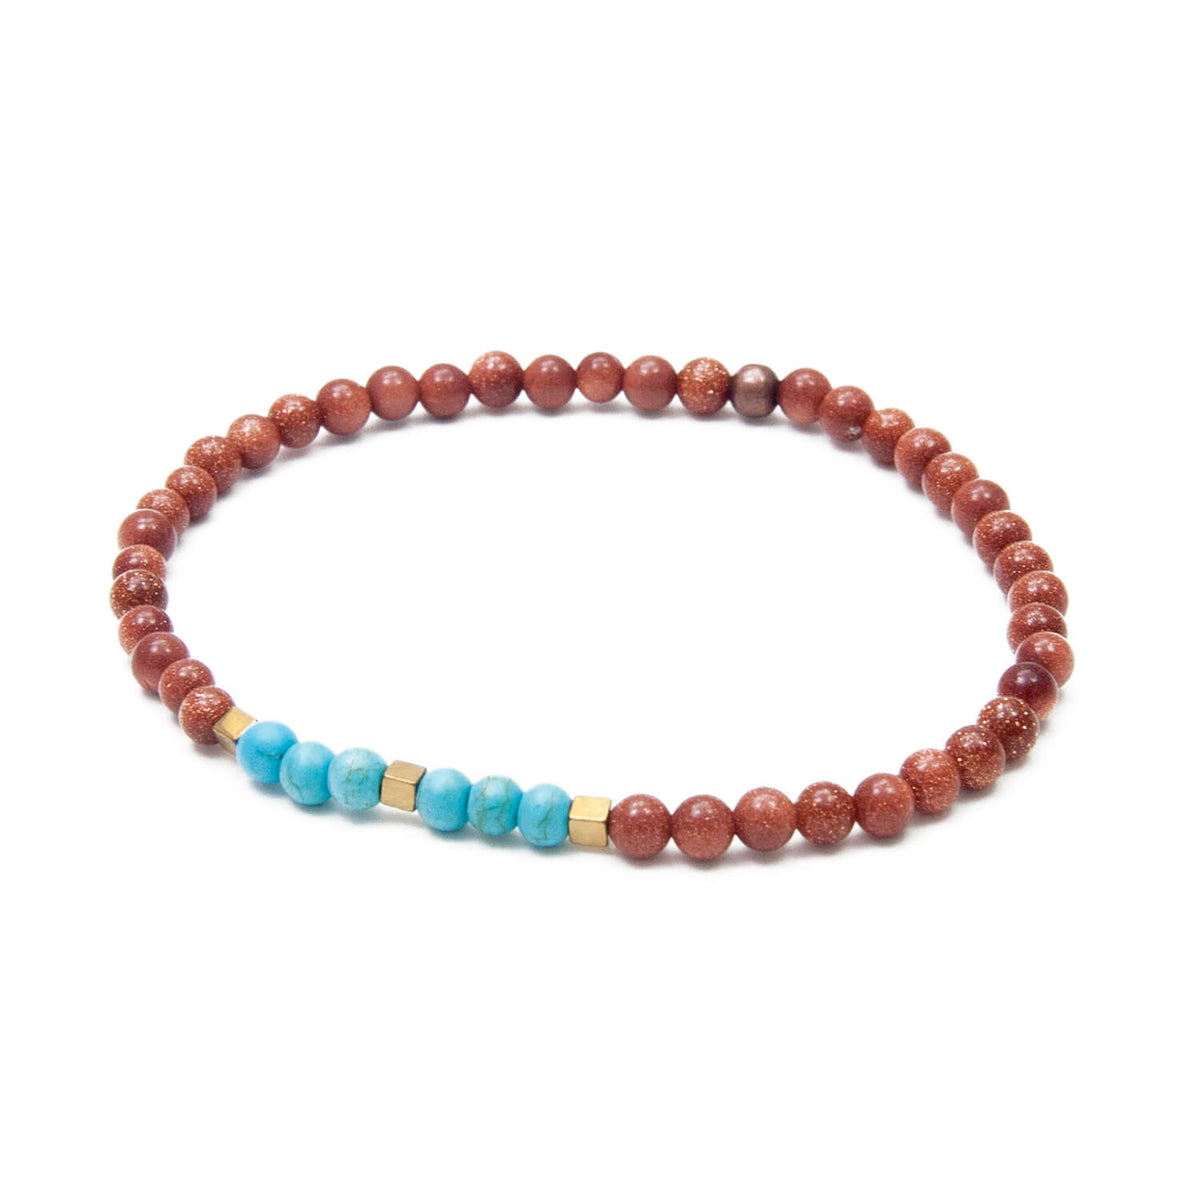 Rustic Tranquility, Goldstone and Turquoise Dainty Bracelet